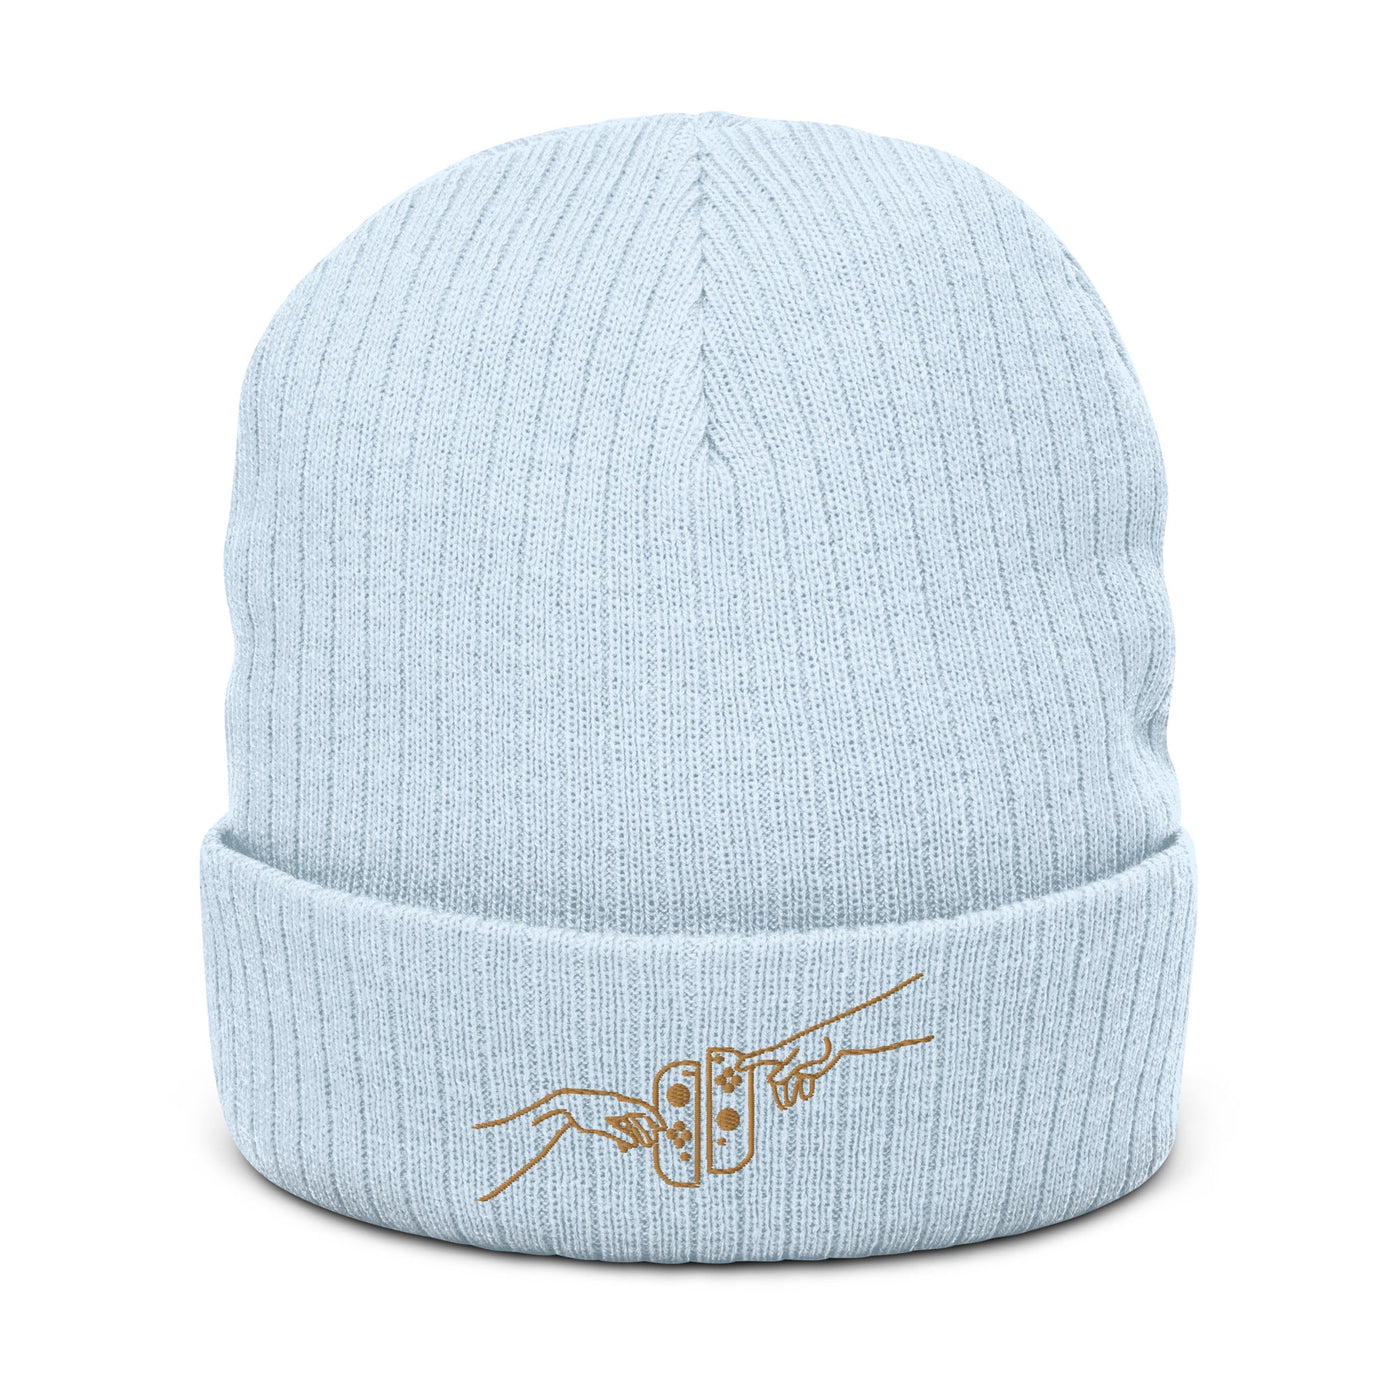 The Creation of Switch | Ribbed knit beanie | Cozy Gamer Threads and Thistles Inventory Light Blue 